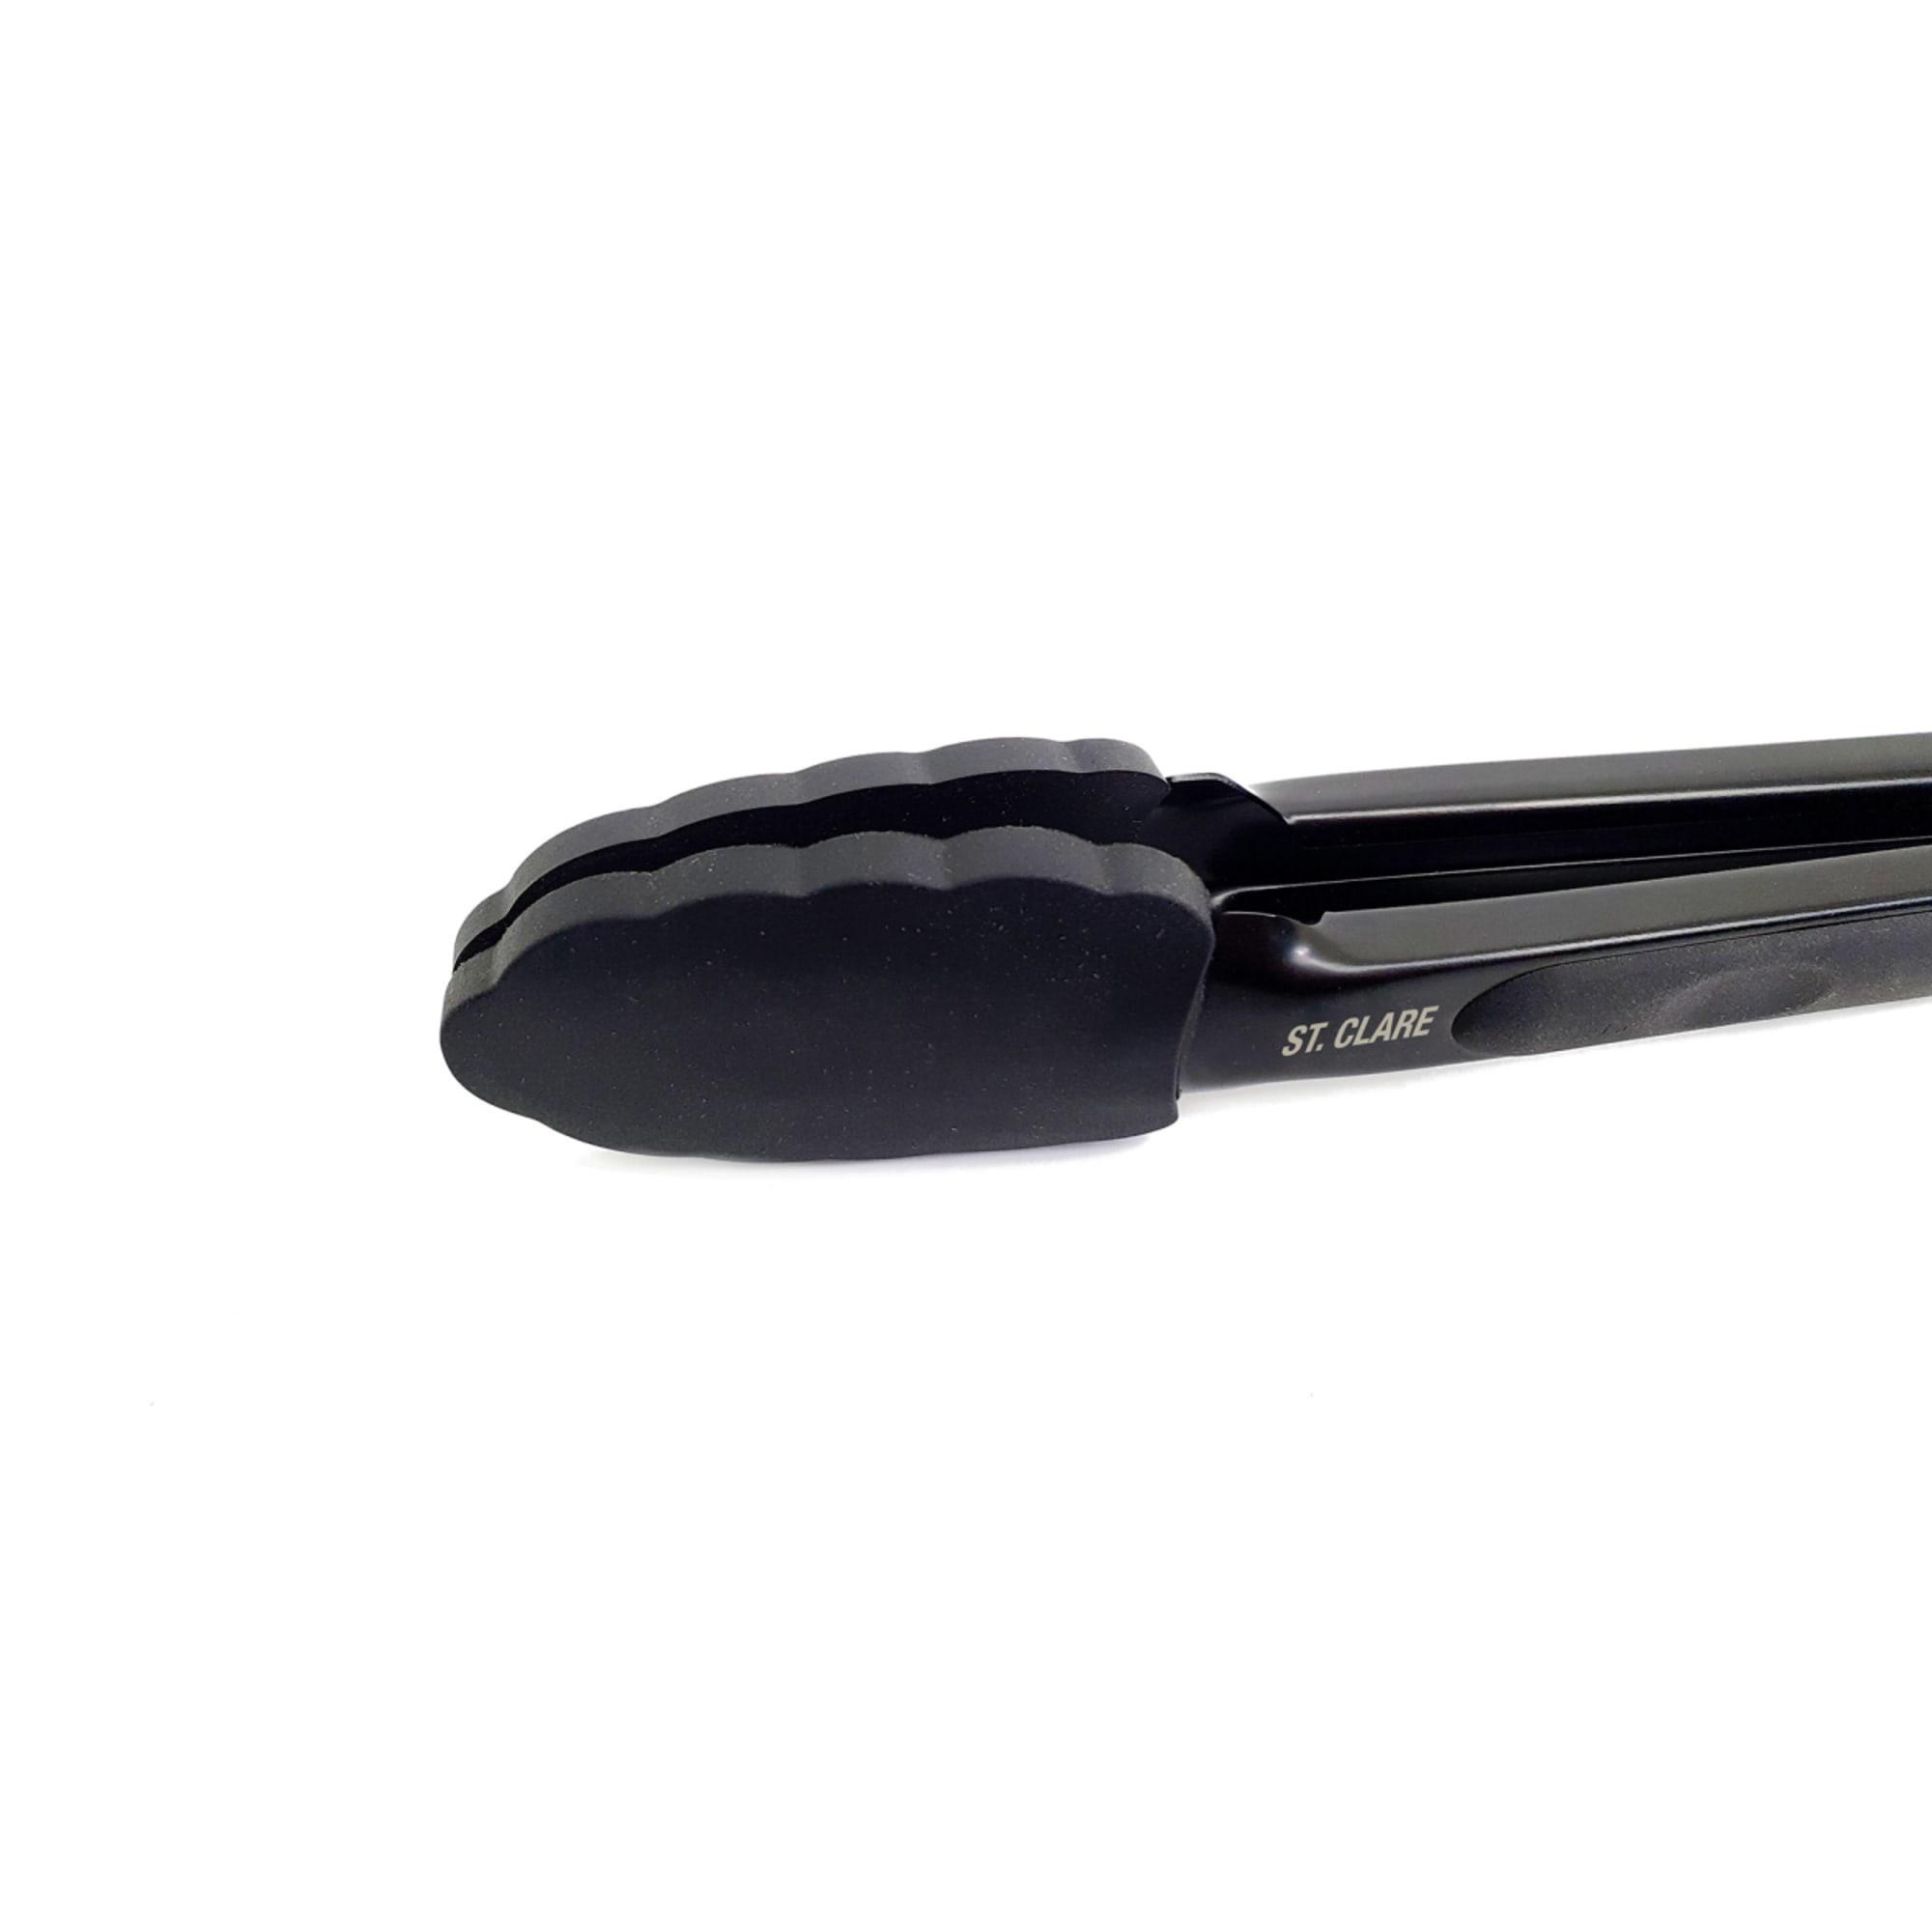 St. Clare Heavy Duty Tongs with Silicone Grip 26cm Black Image 5